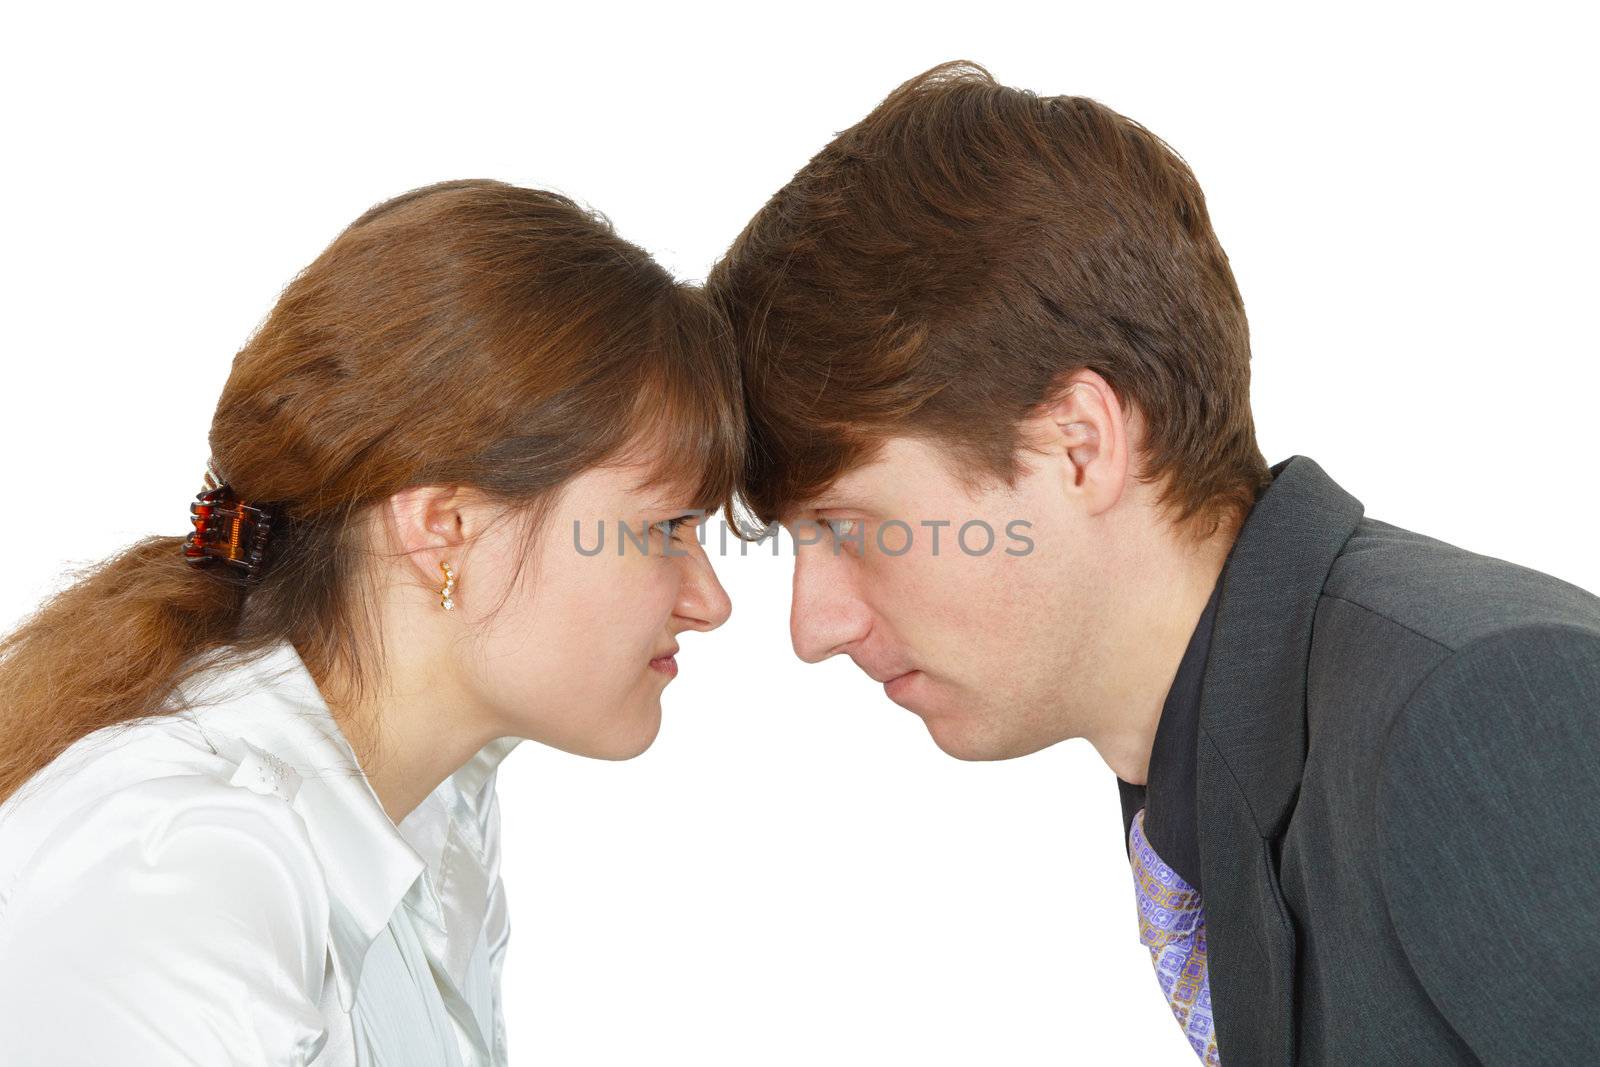 A conflict between man and young woman